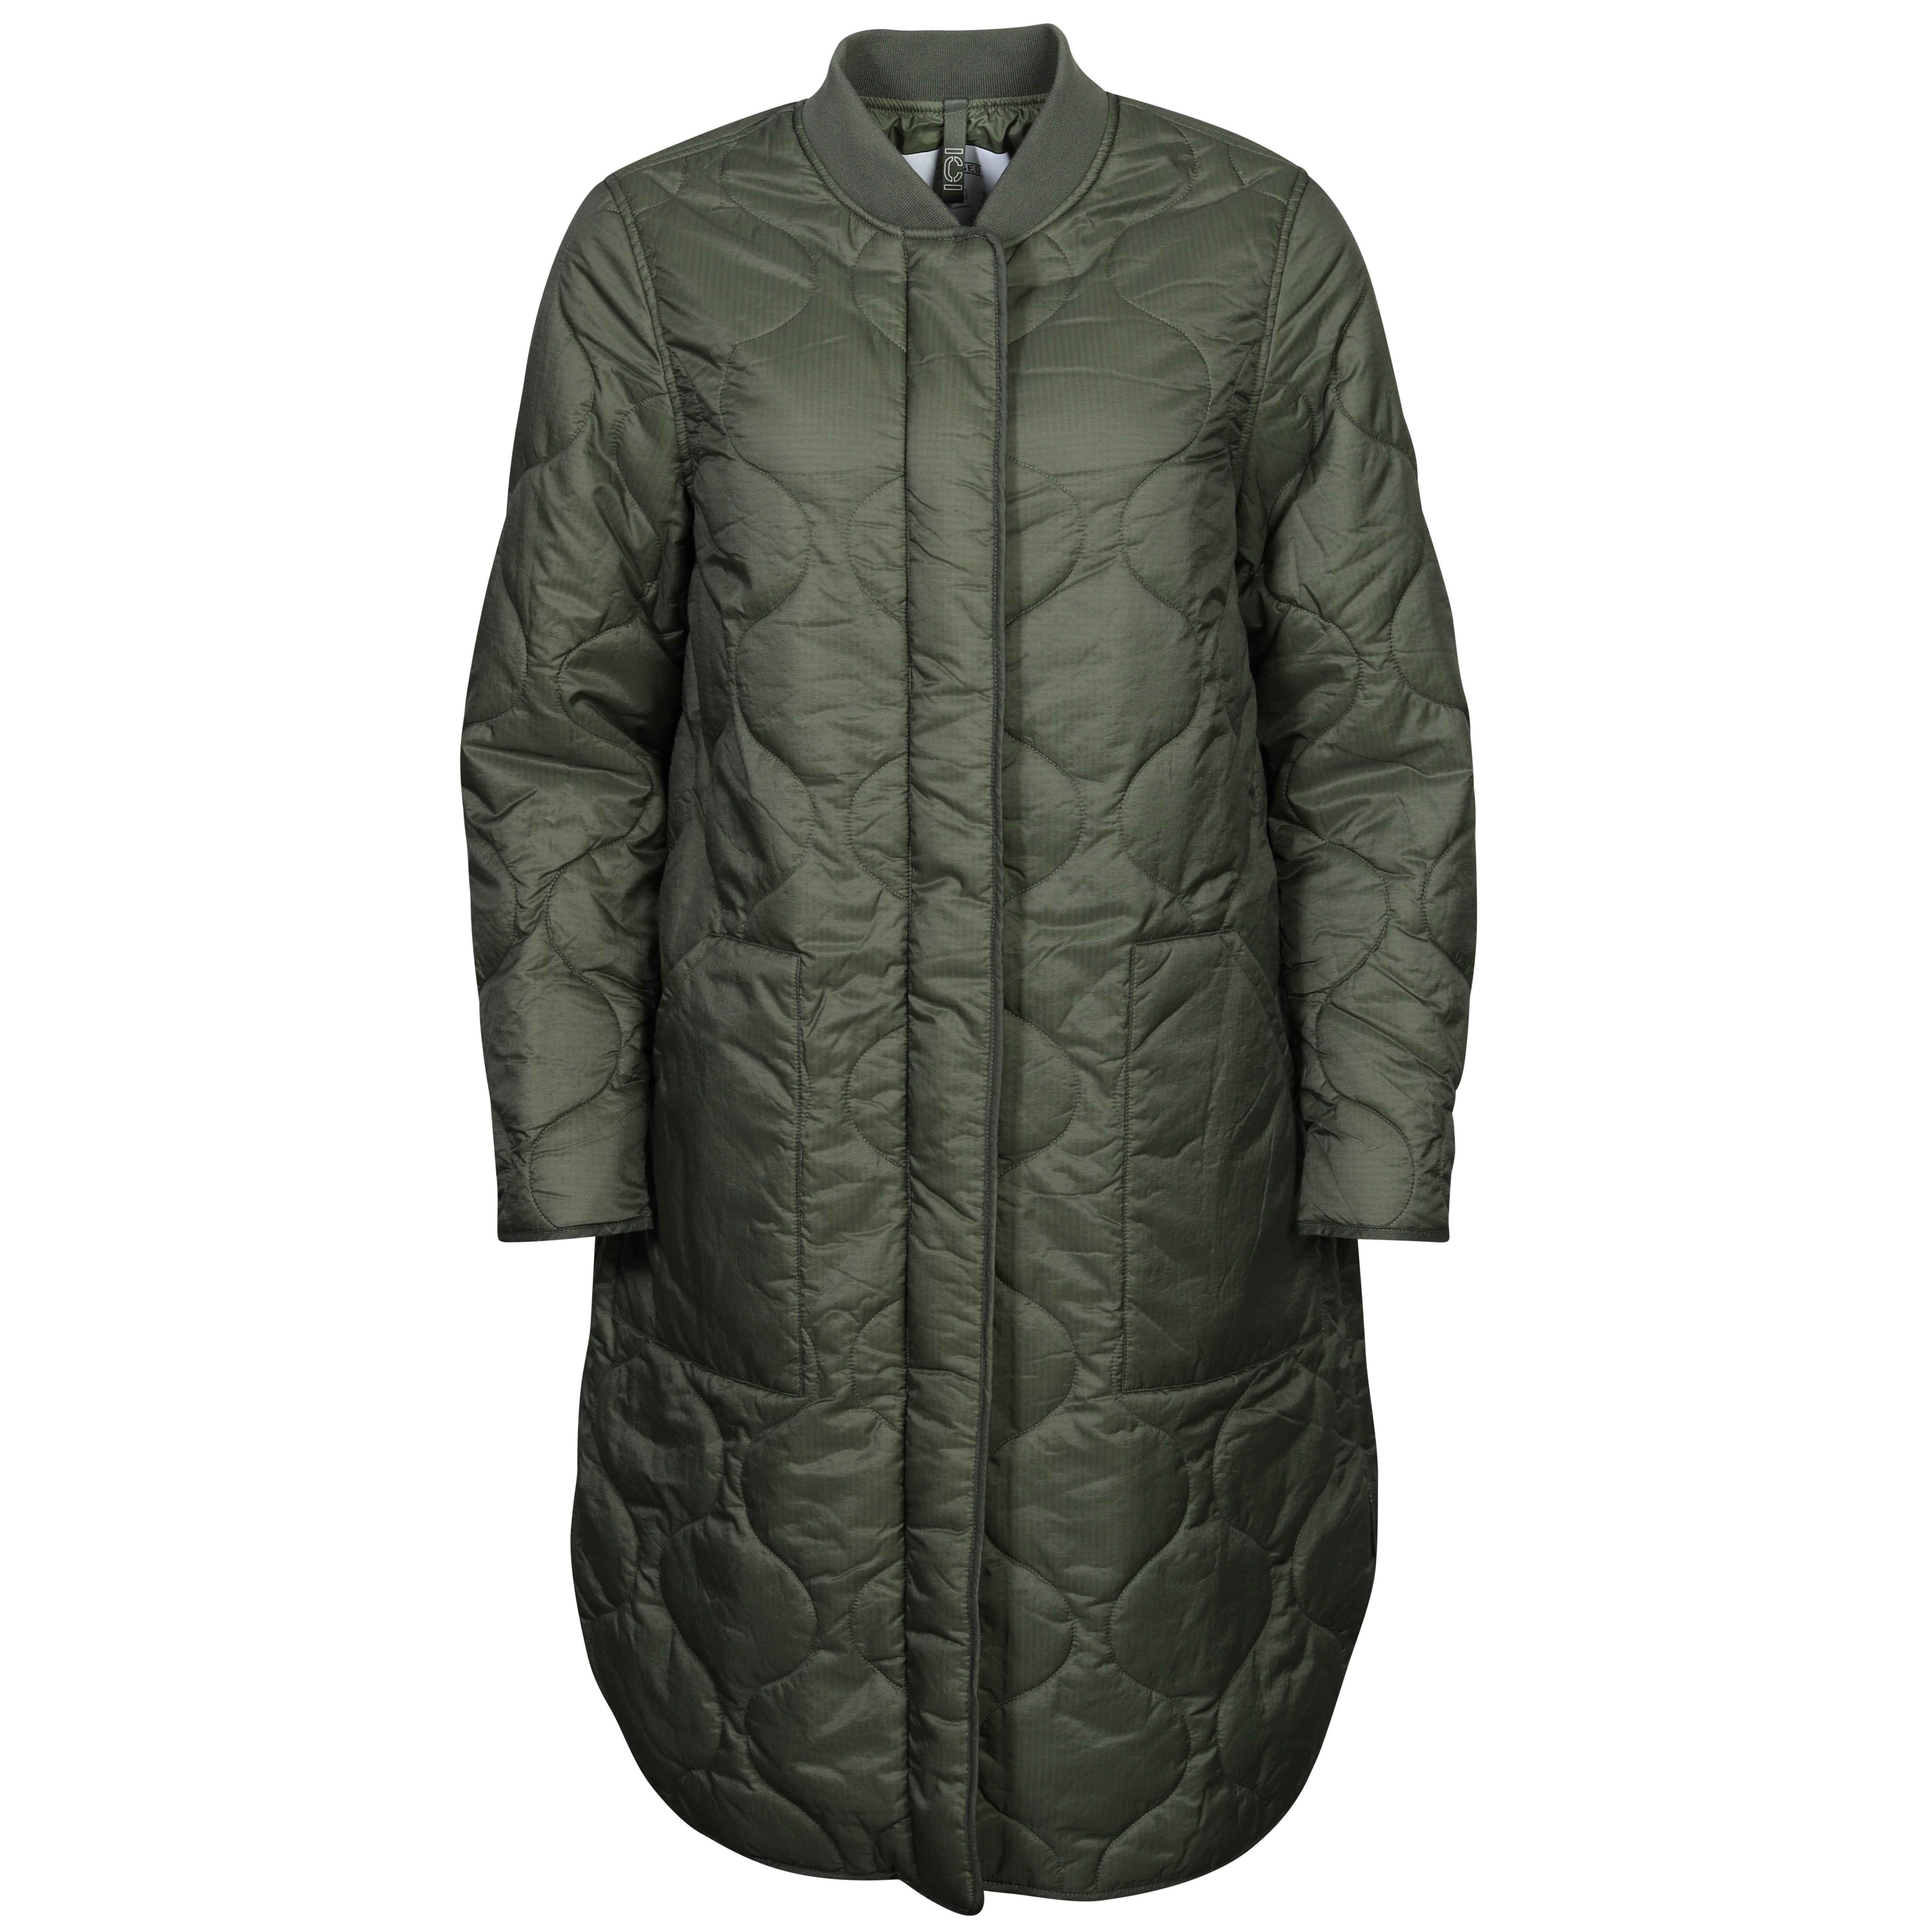 Closed Light Weight Nylon Coat in Army Green XS